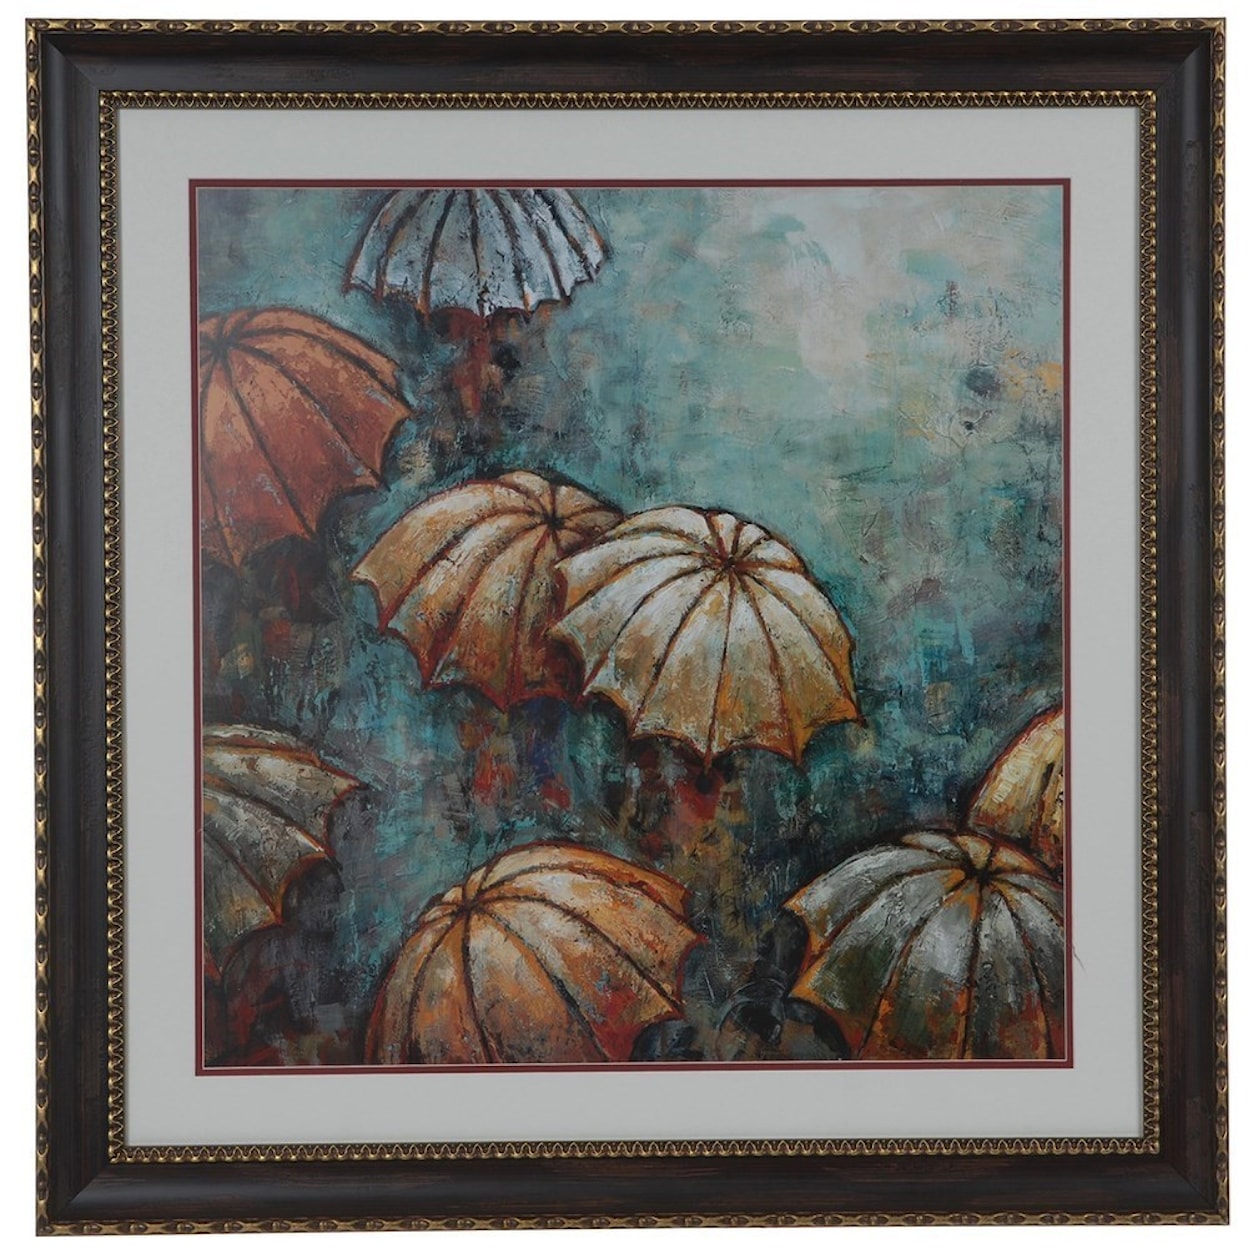 Crestview Collection Prints and Paintings Umbrellas